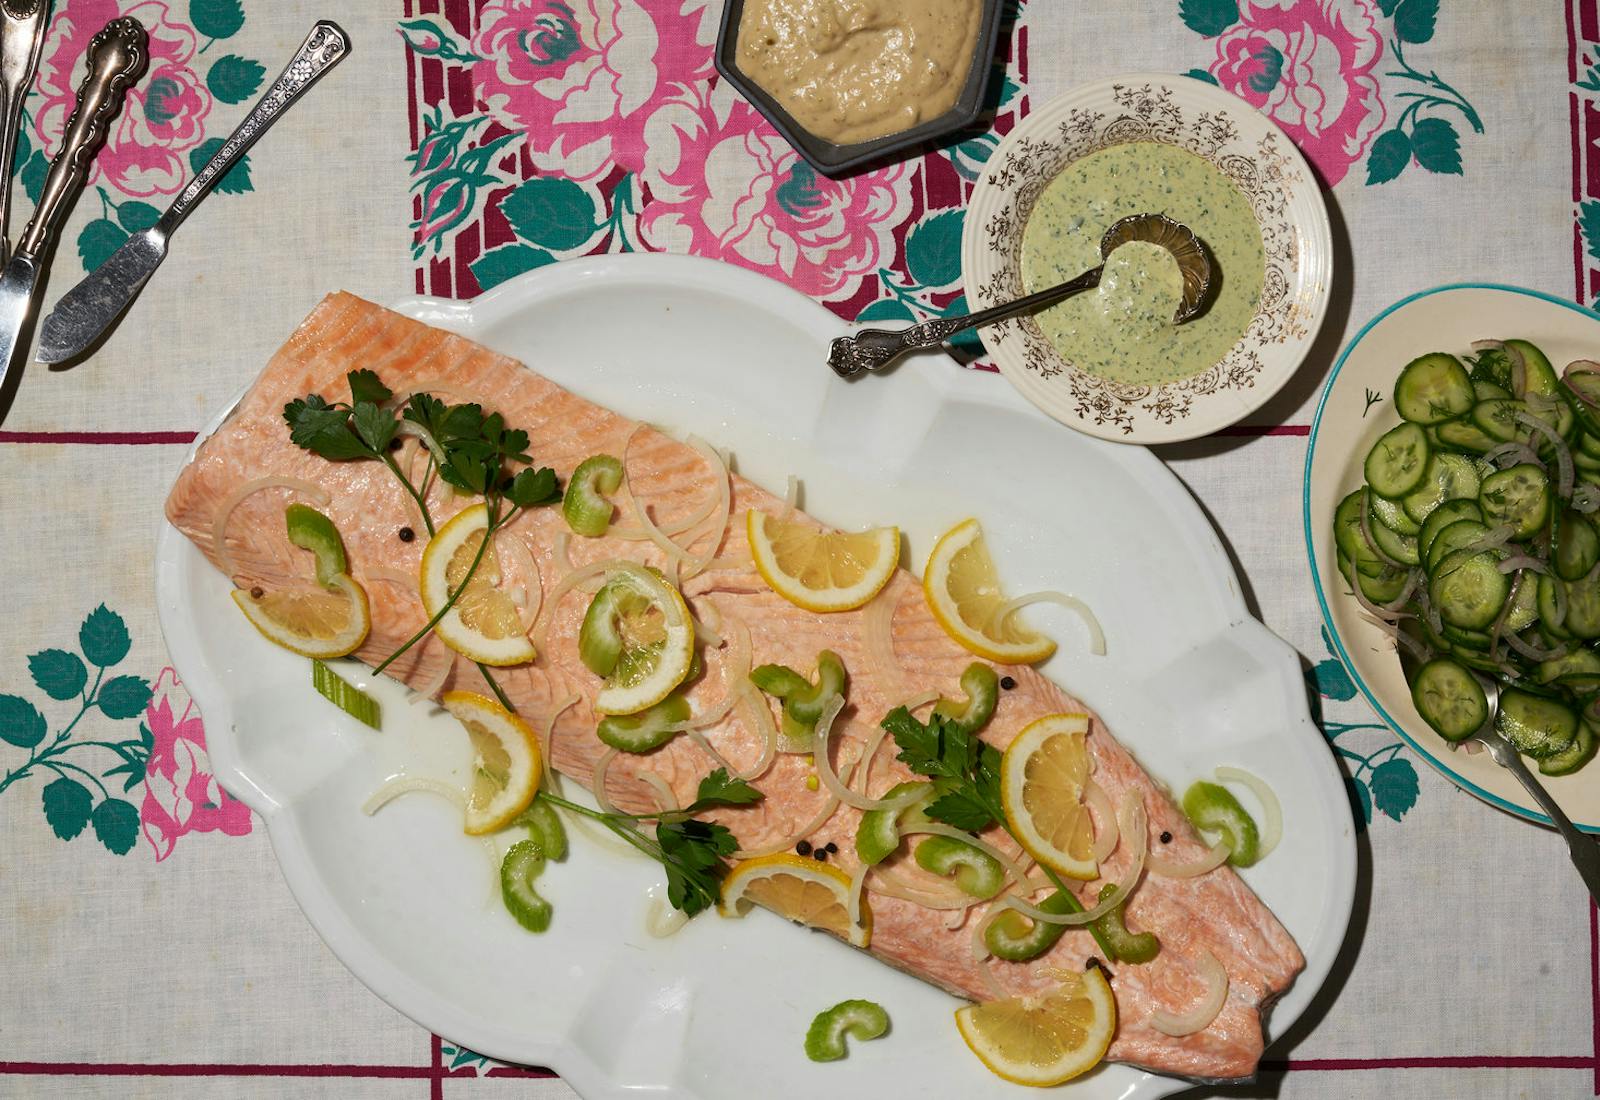 Poached salmon garnished with lemon wedges, celery and parsley alongside tonnato sauce, sauce vert and cucumber salad. 